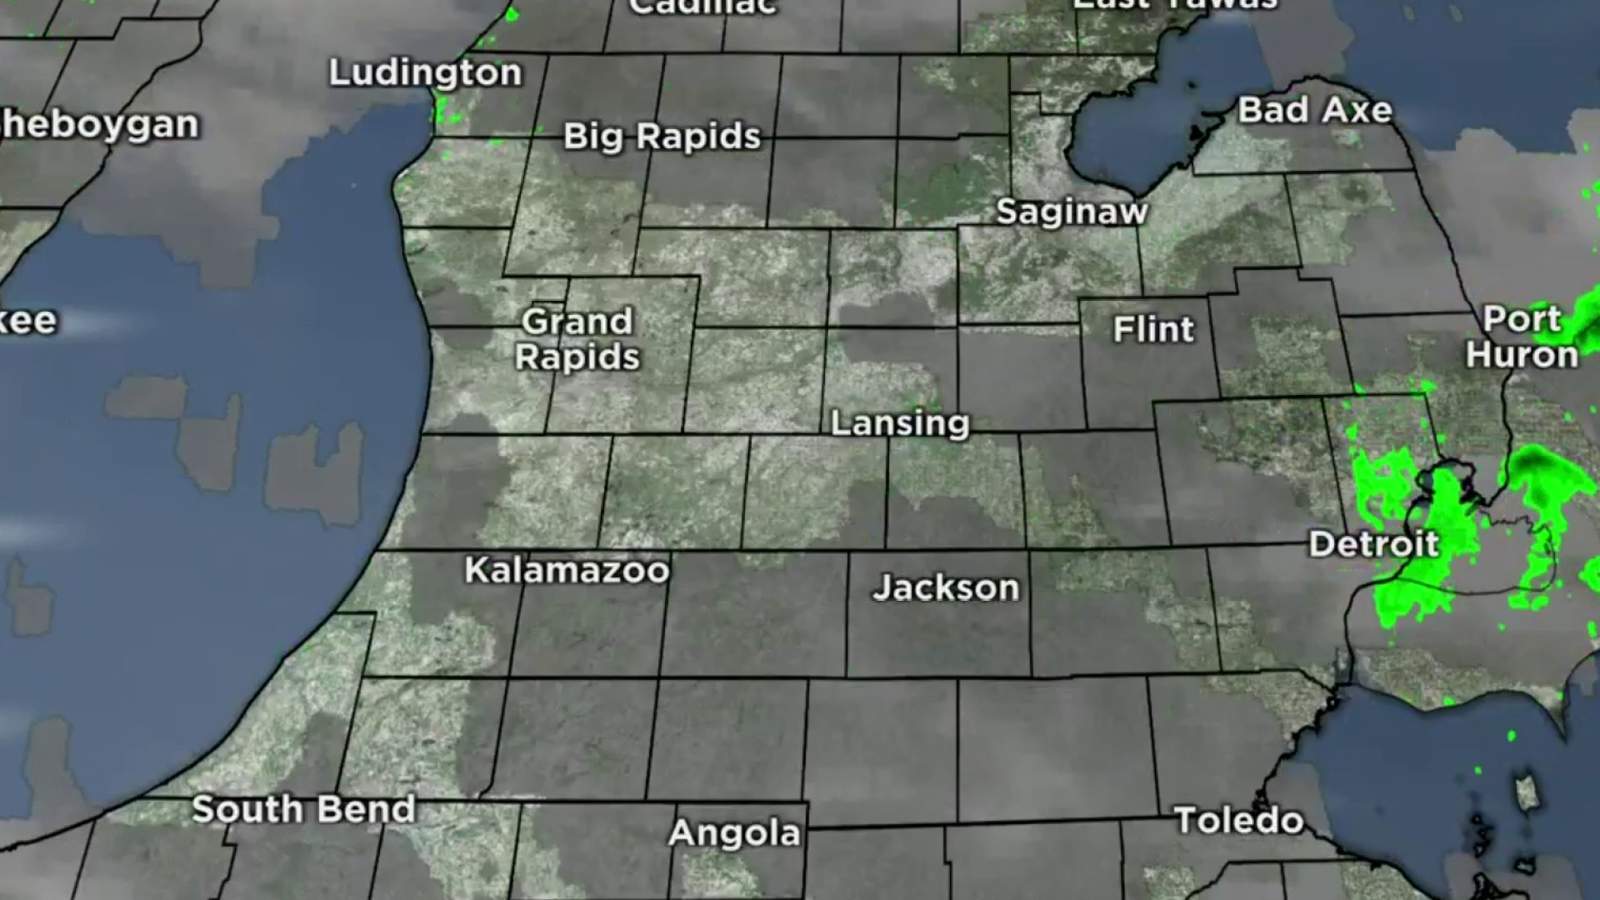 Metro Detroit weather: Warmer Wednesday ahead with highs near the 80s